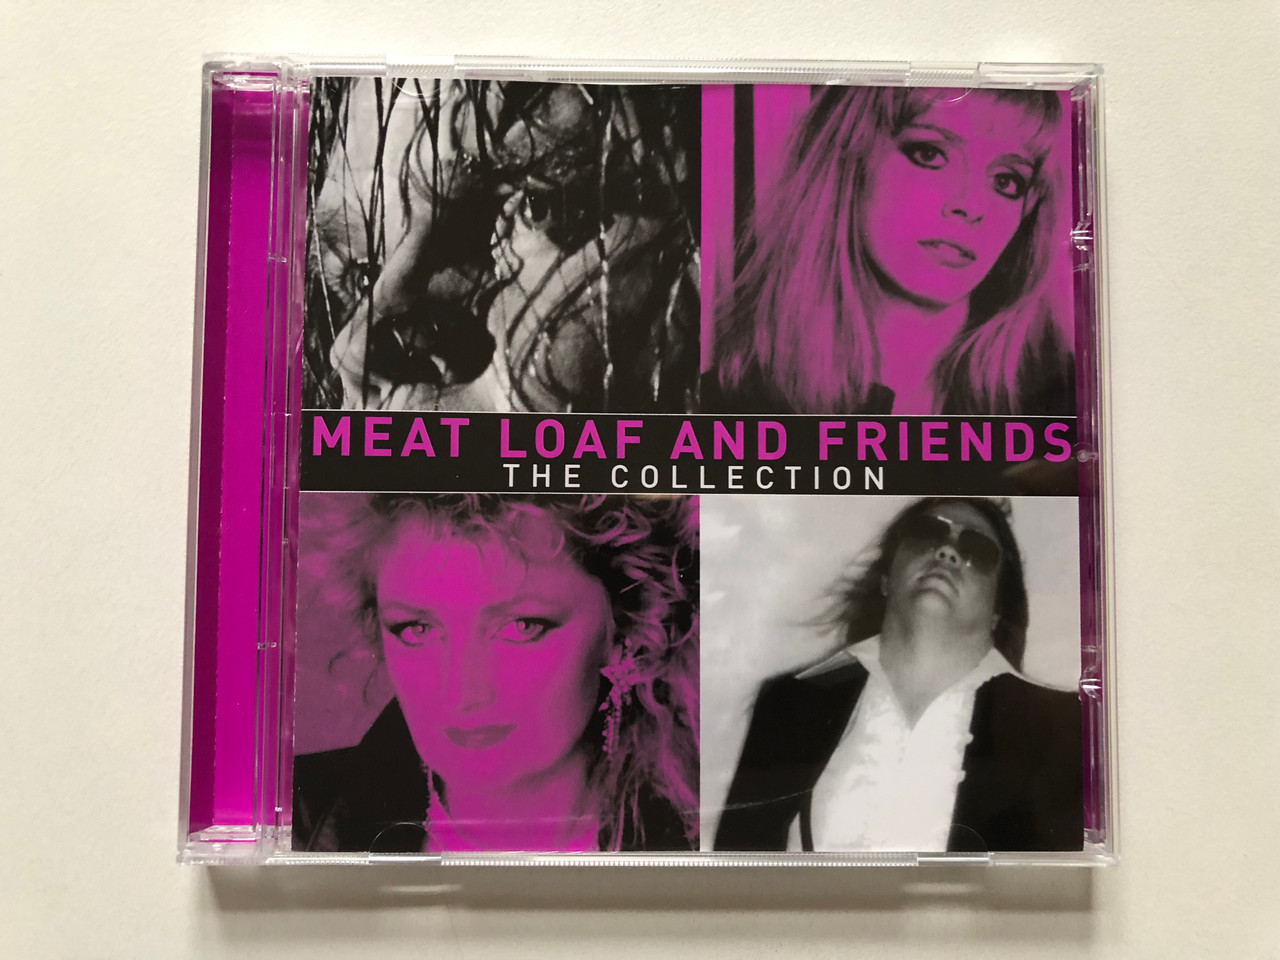 https://cdn11.bigcommerce.com/s-62bdpkt7pb/products/0/images/314972/Meat_Loaf_And_Friends_-_The_Collection_Epic_Audio_CD_2003_4724195_1__59068.1701713184.1280.1280.JPG?c=2